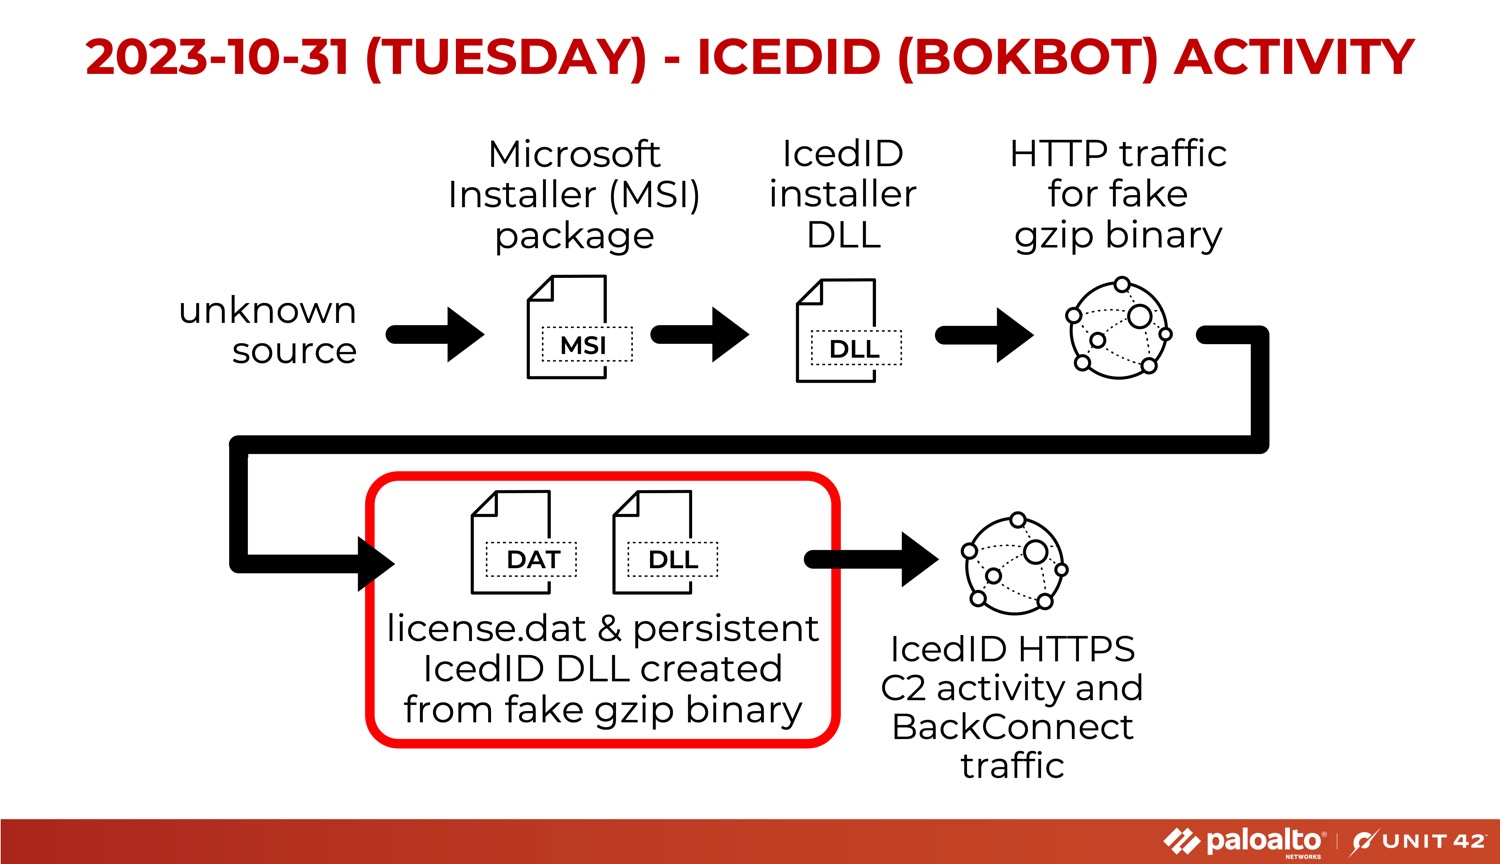 IcedID (BokBot) activity. Unknown source > Microsoft Installer (MSI) package > IcedID installer DLL > HTTP traffic for fake gzip binary > license.dat and persistent IcedID DLL created from fake gzip binary > IcedID HTTP C2 activity and BackConnect traffic. 